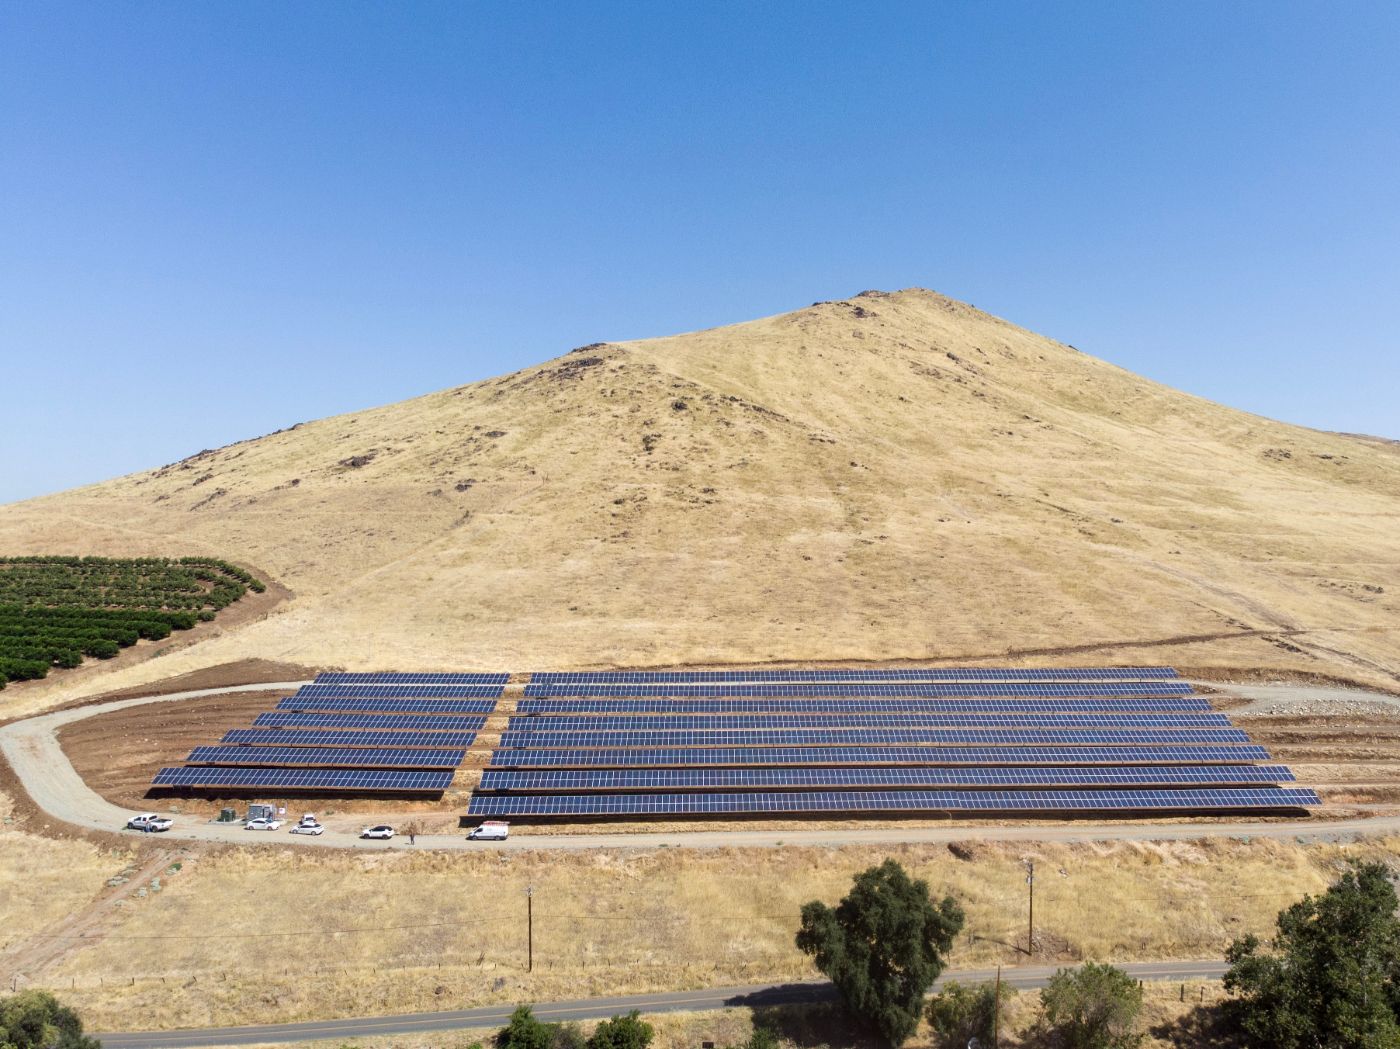 Aerial view of a small solar farm at the base of a brown hill with blue skies in the background.